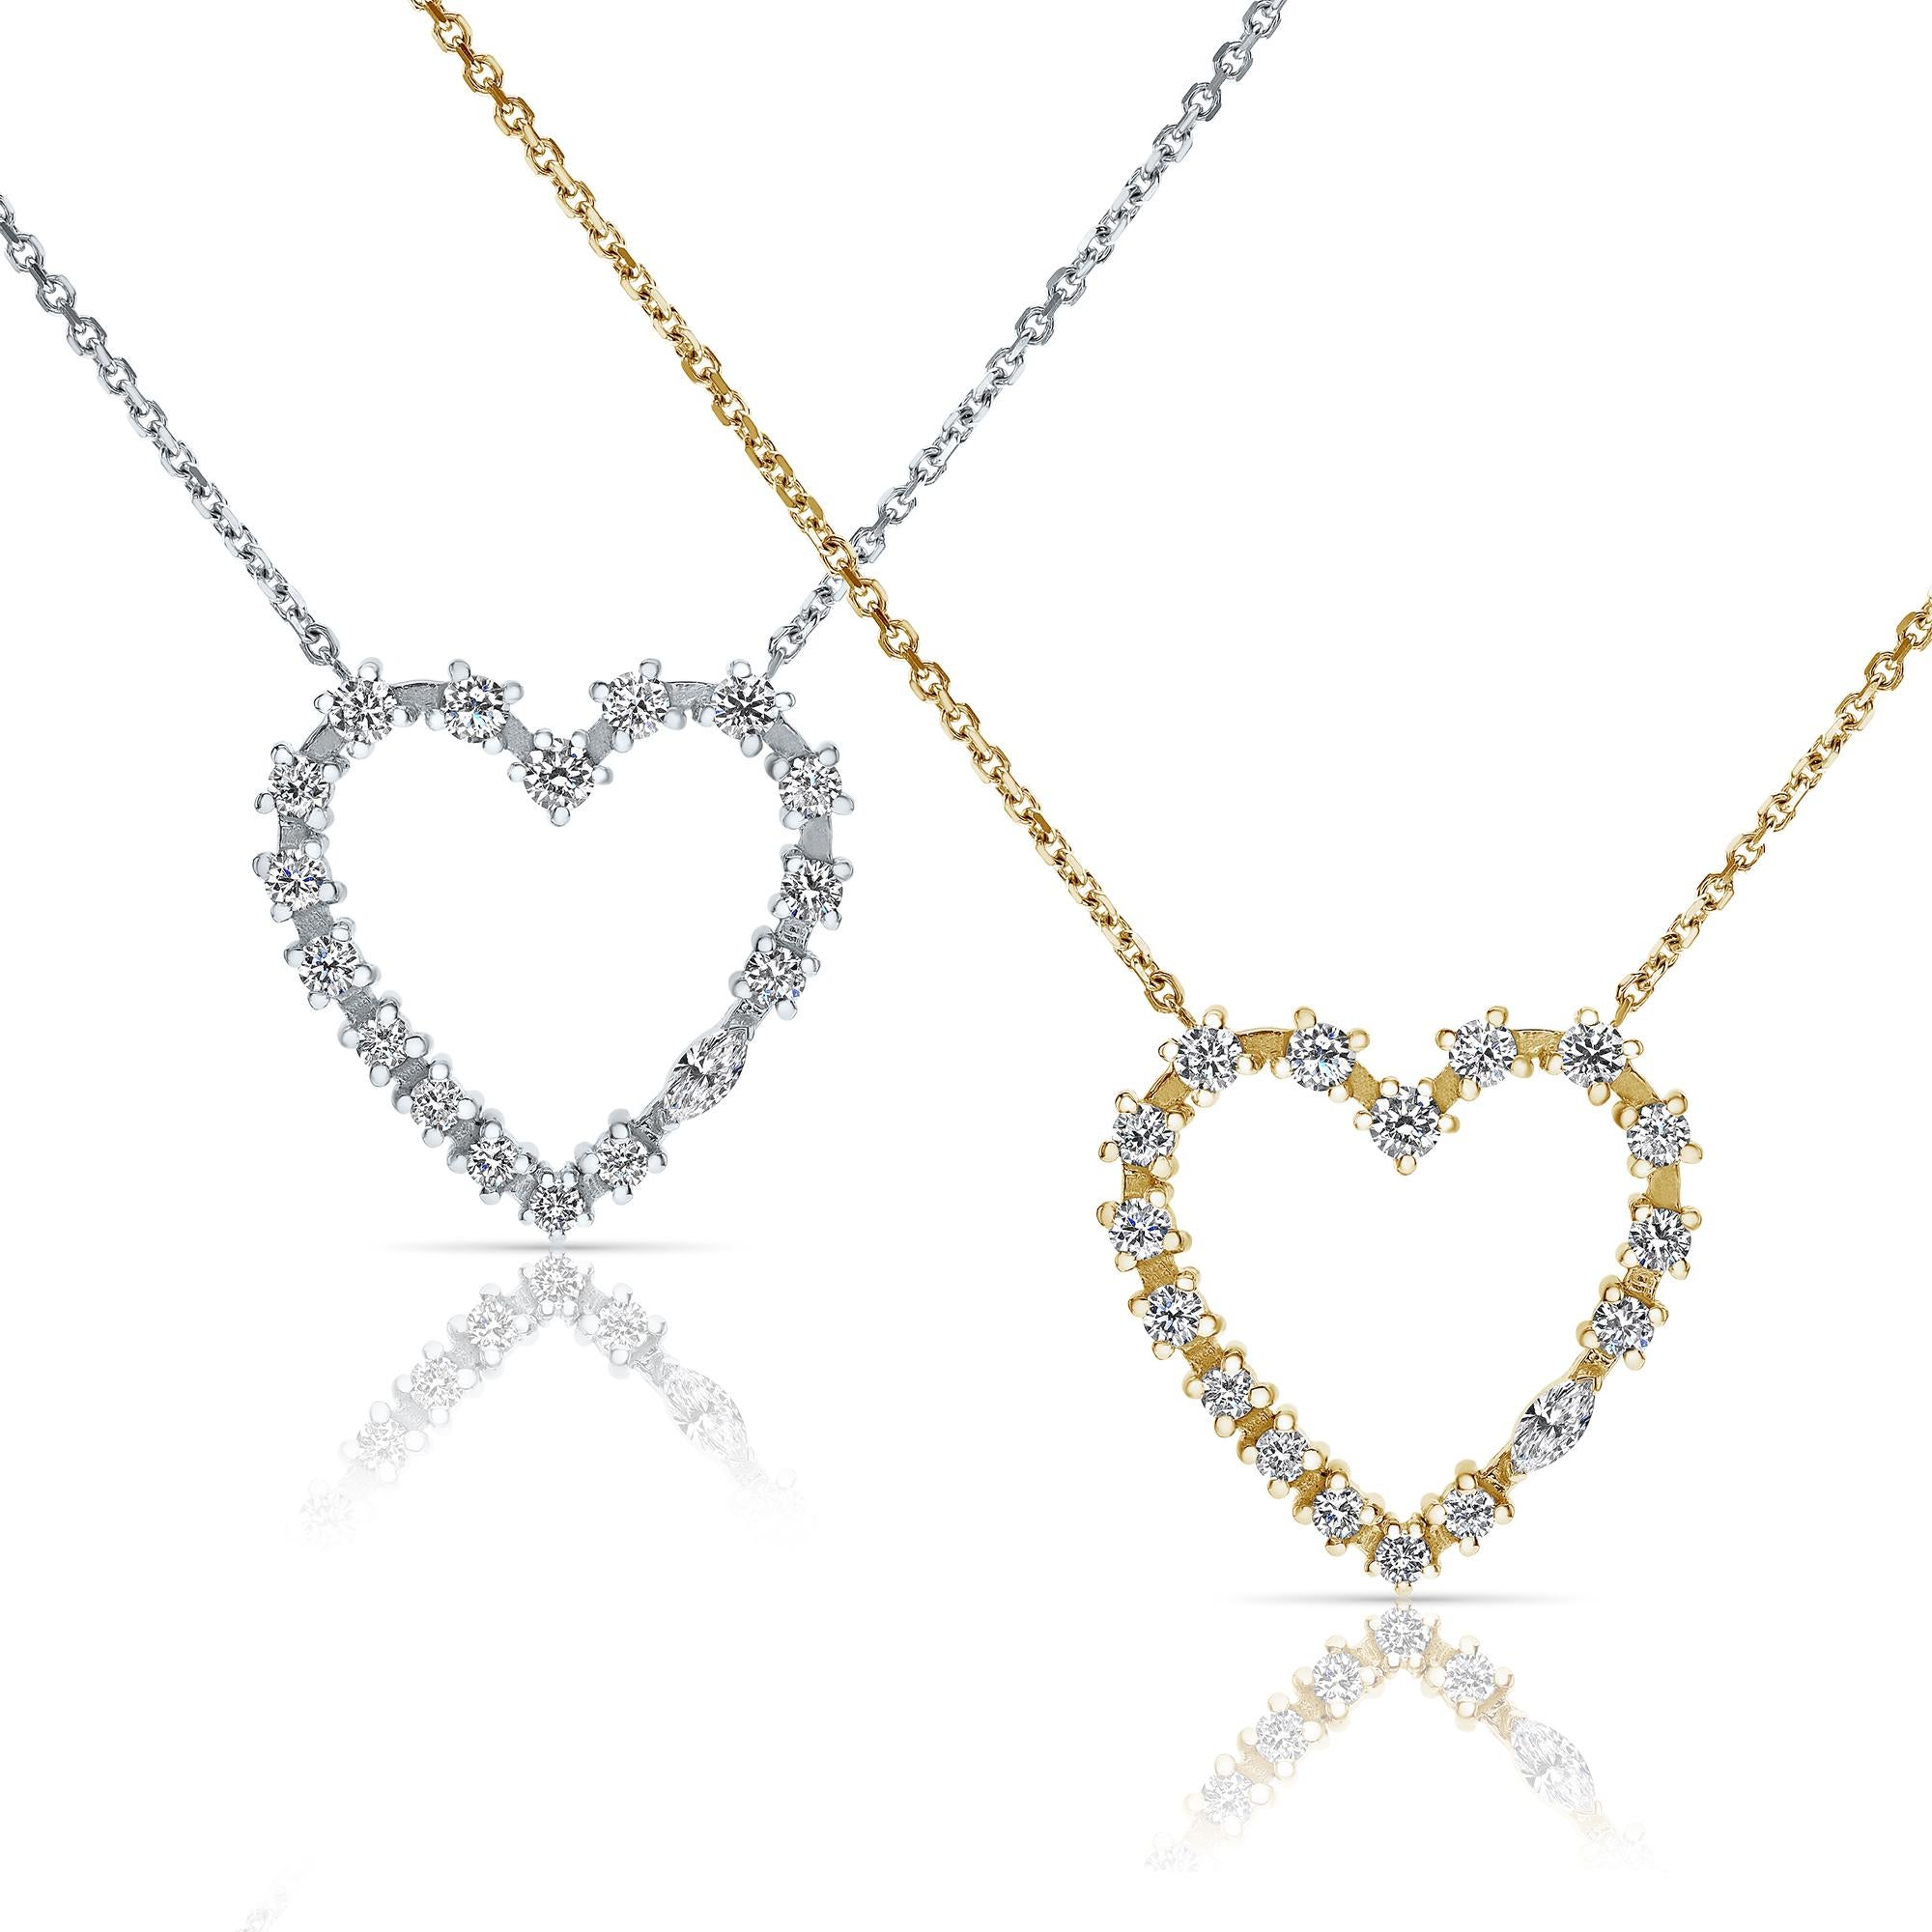 14K White Gold 0.37 Carat Heart Shaped Diamond Pendant Necklace - Shlomit Rogel

Beautiful heart shaped diamond pendant from Cupid's Kiss collection, set with 18 stunning real diamonds. Can you spot the hidden marquise diamond among these beautiful